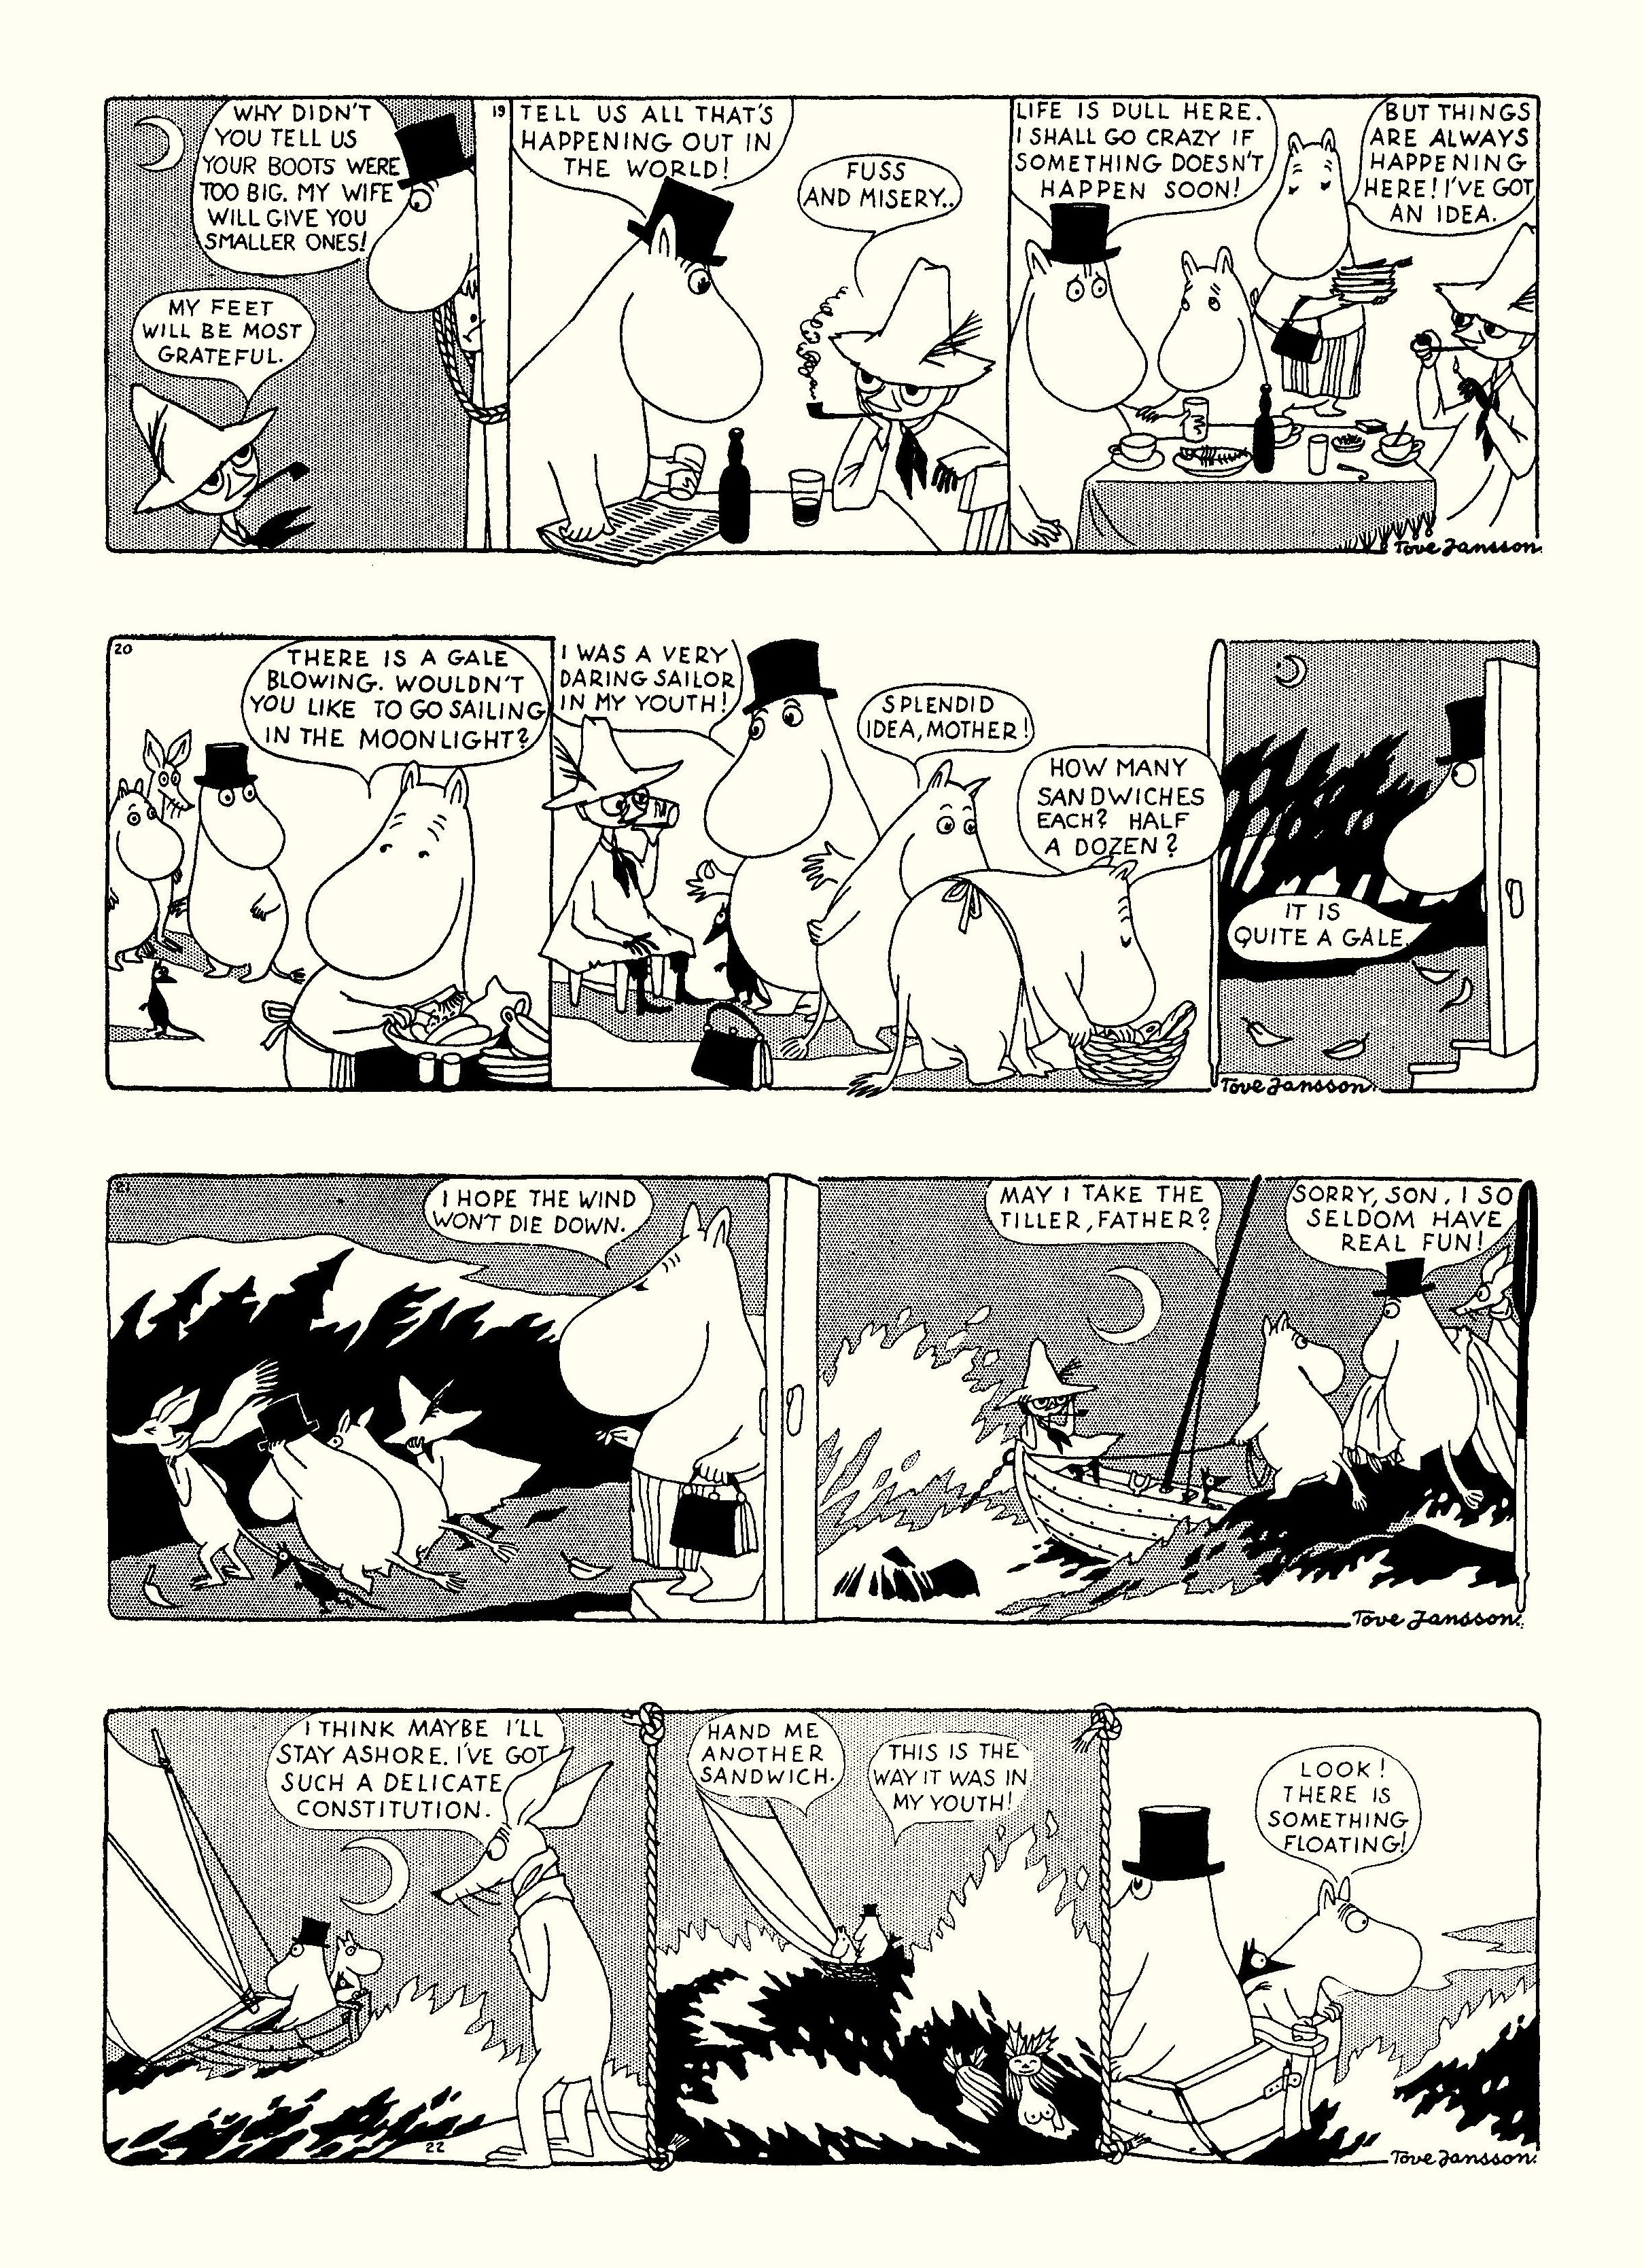 Read online Moomin: The Complete Tove Jansson Comic Strip comic -  Issue # TPB 1 - 35